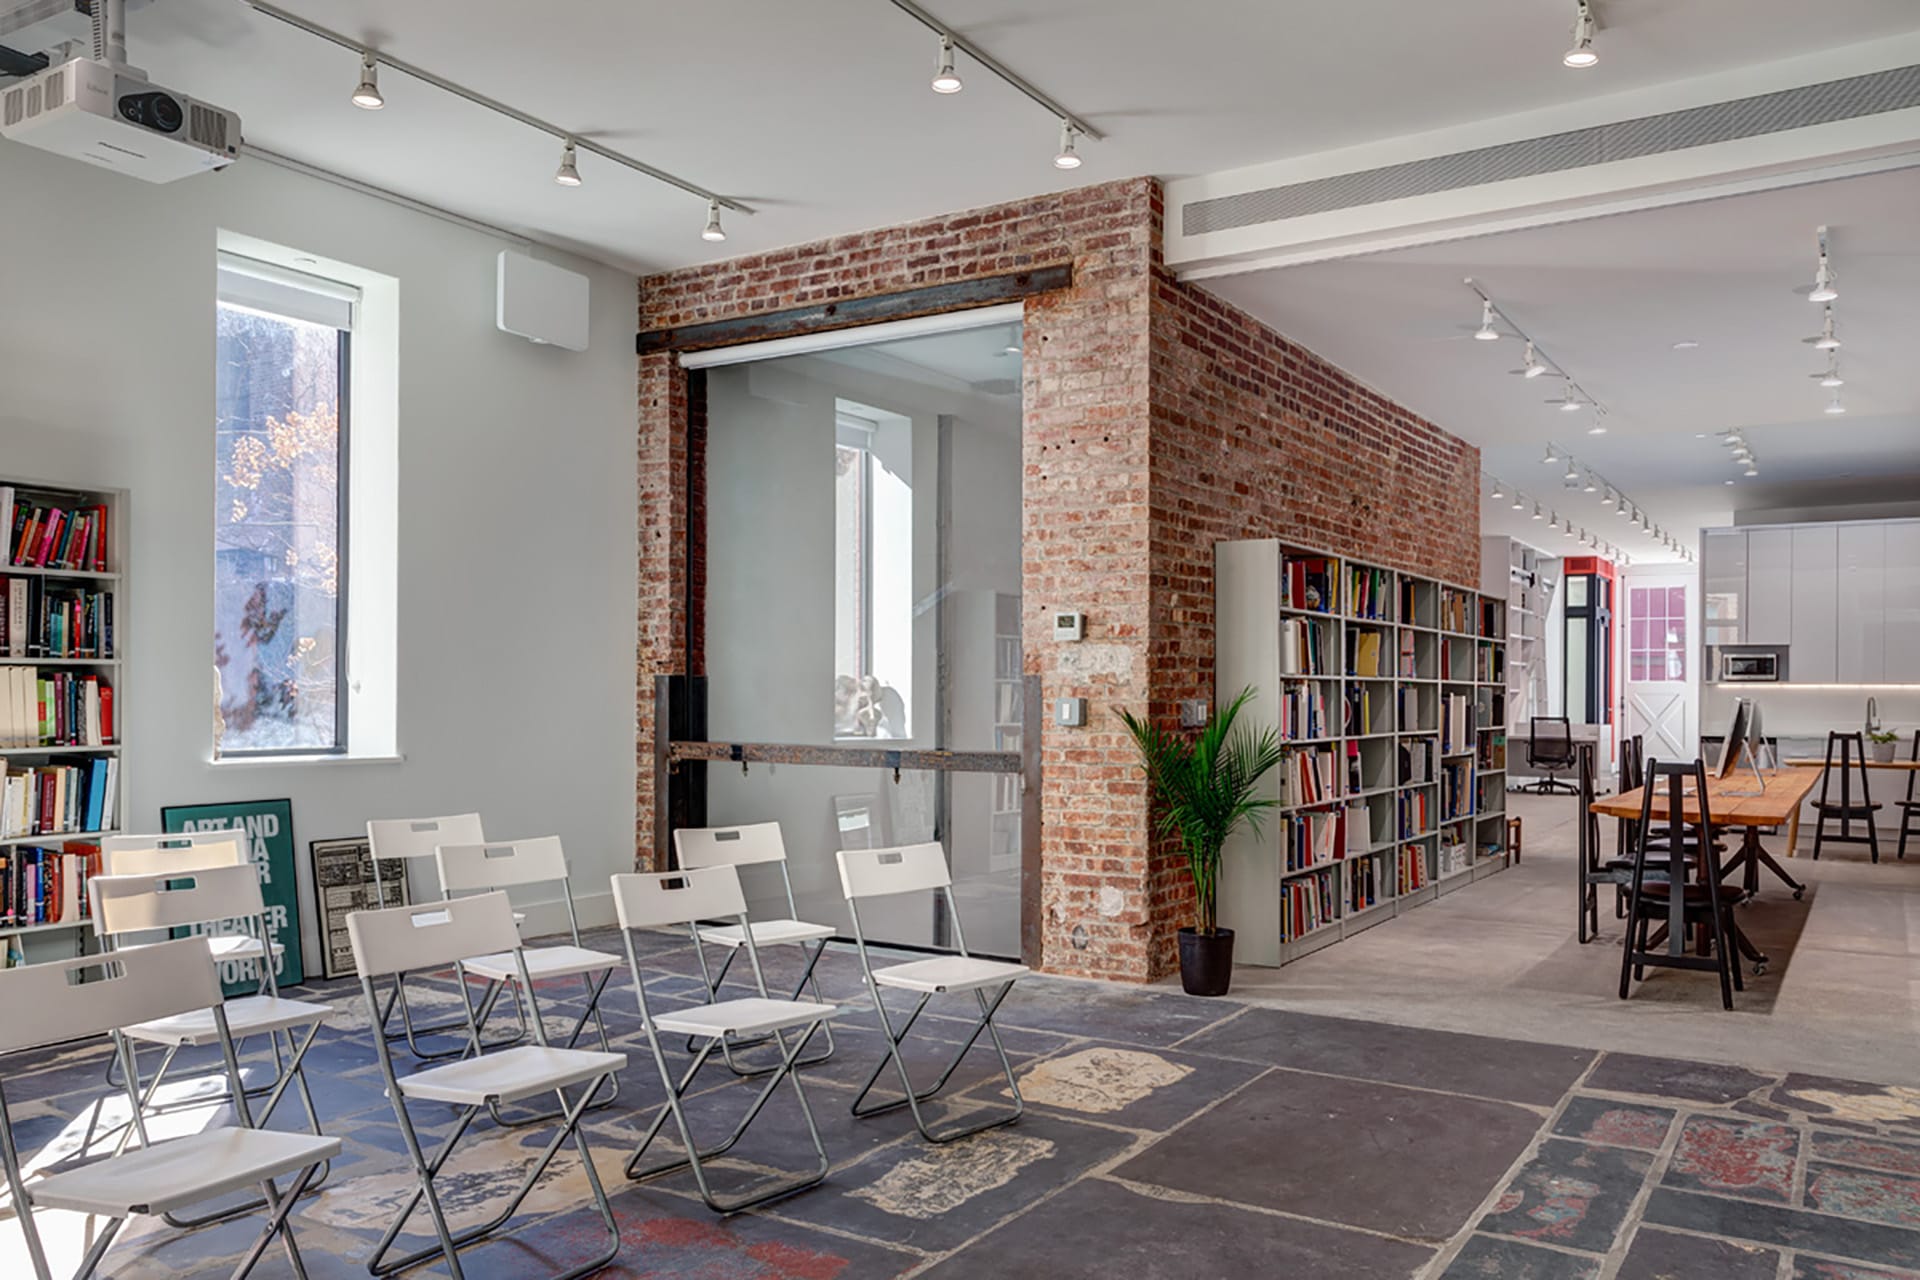 Meeting space with restored stone floors, bookshelves housing Asian Art History books, and an exposed brick elevator shaft converted into a stairwell.